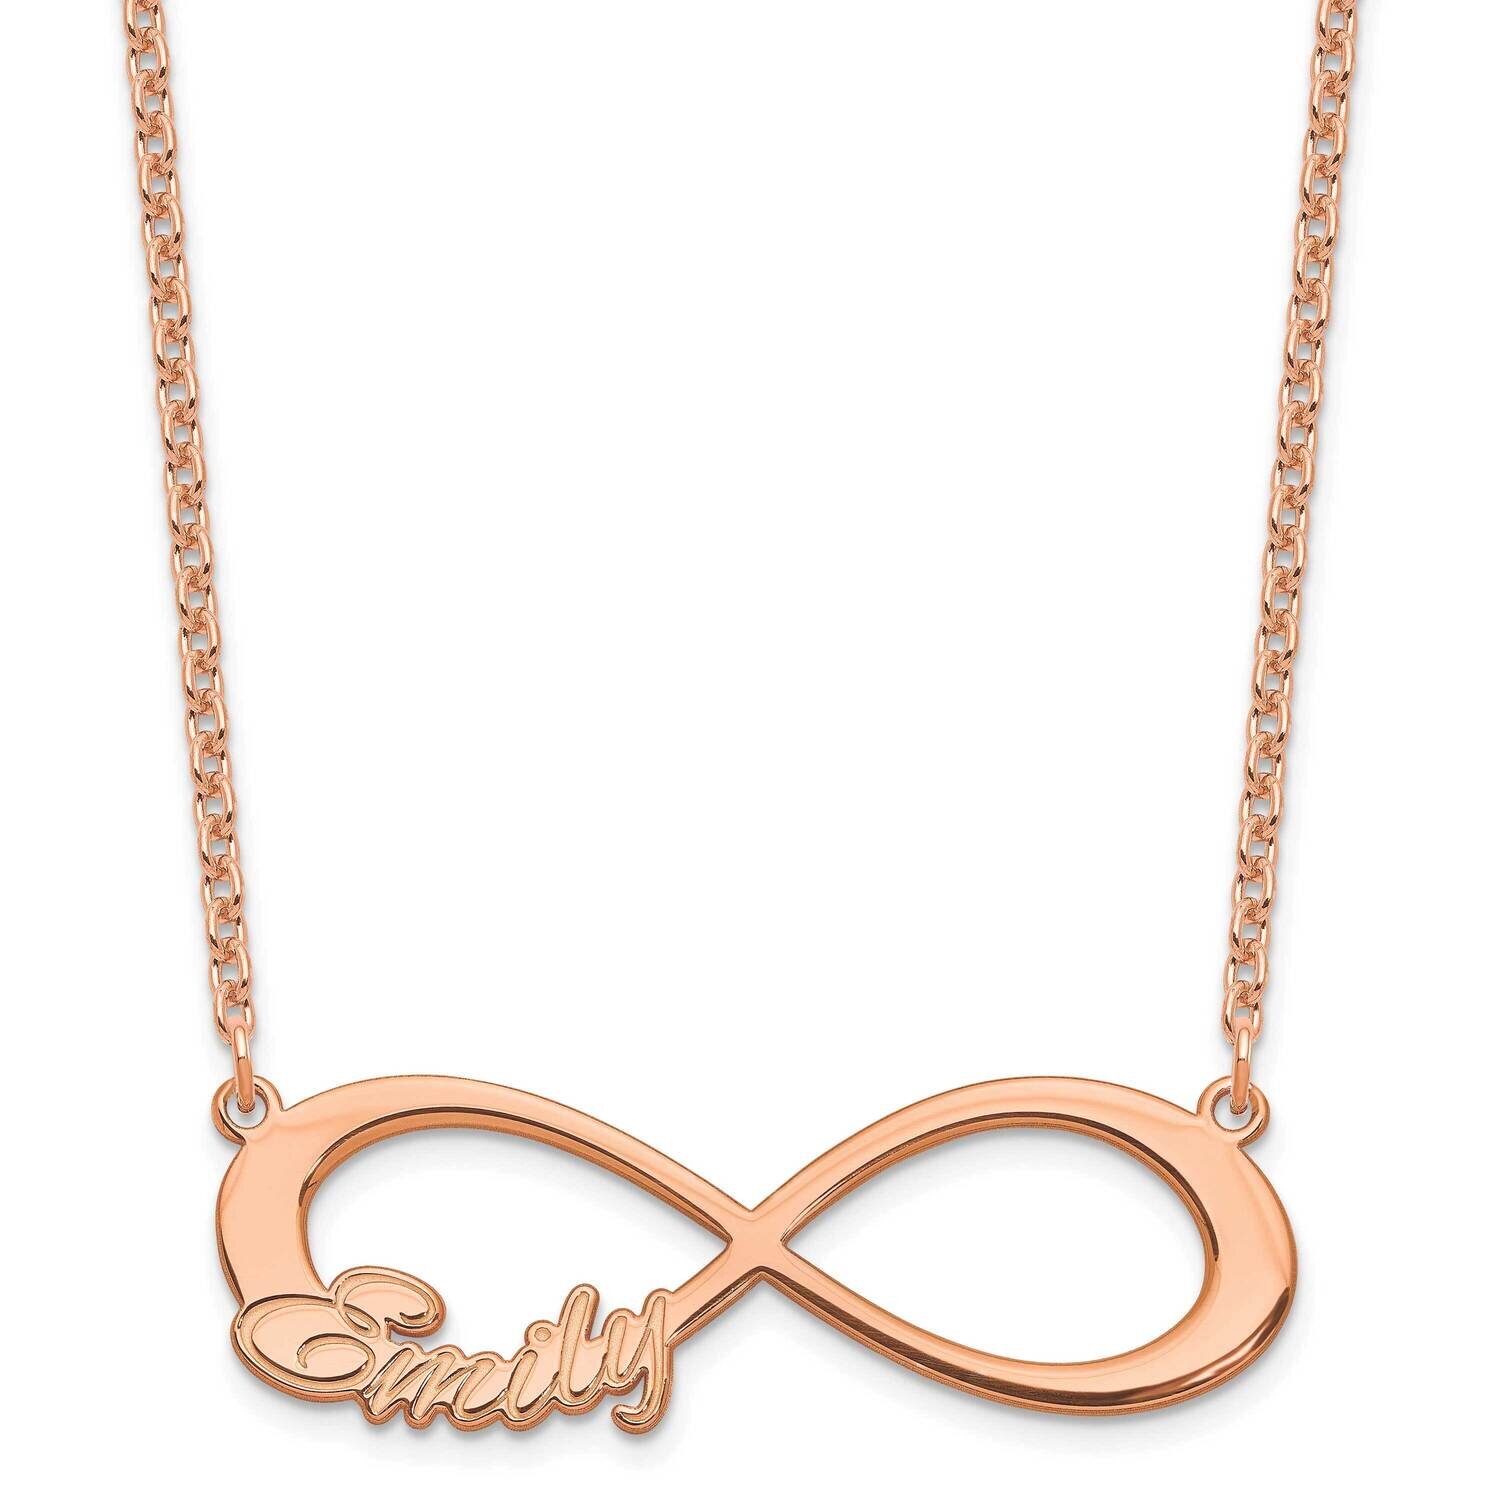 1 Name Infinity Necklace Sterling Silver Rose-plated XNA1190RP